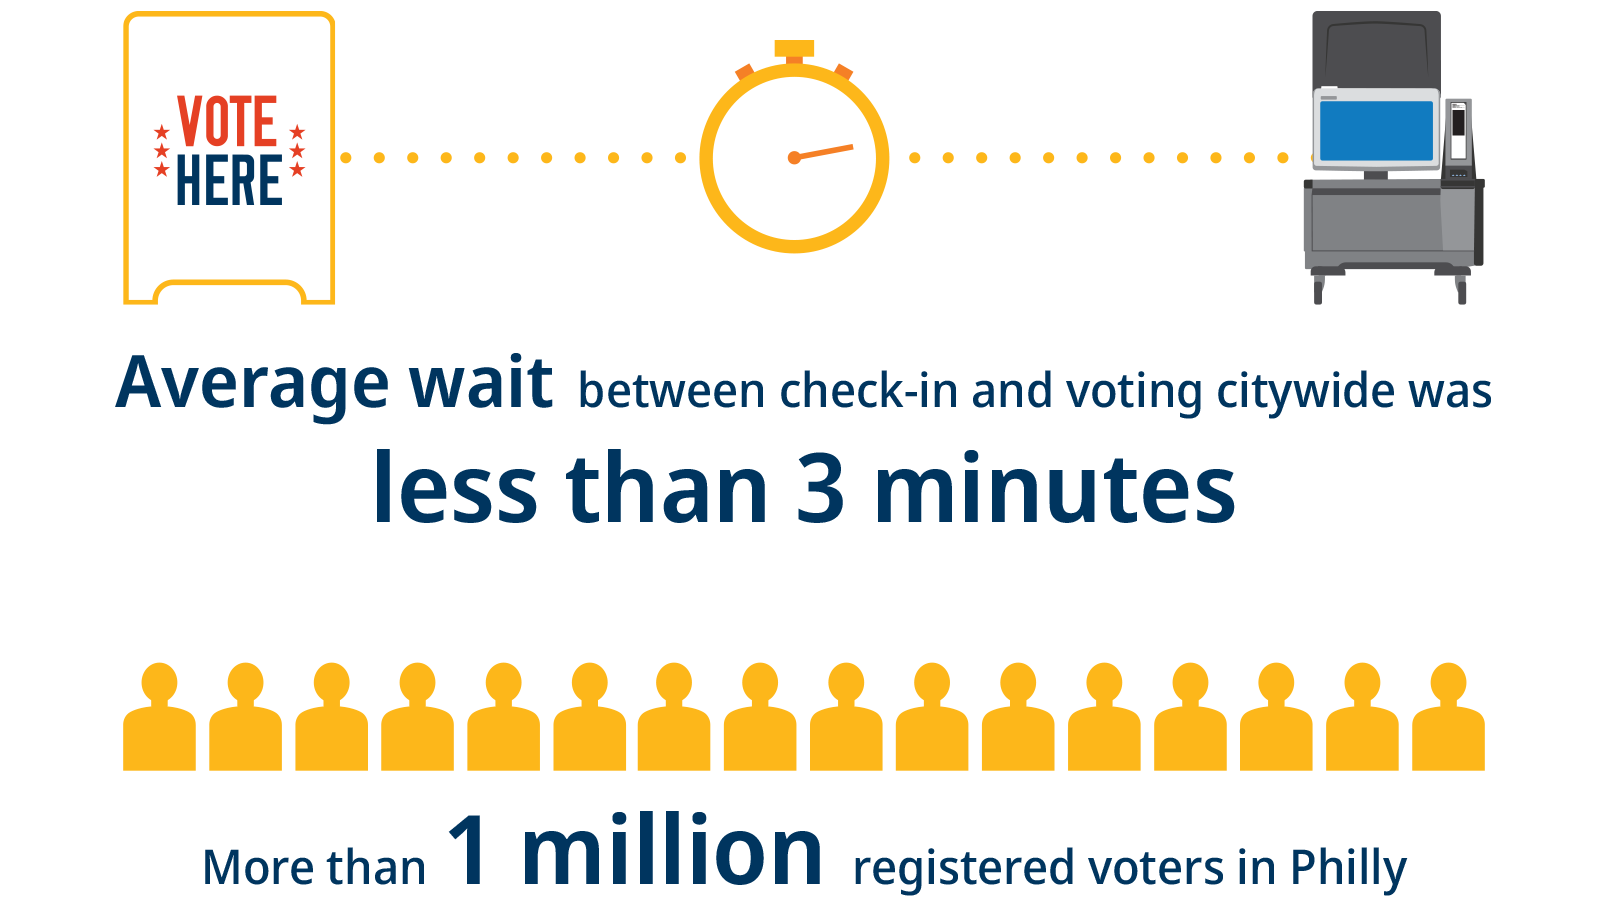 Infographic: Average wait between check-in and voting in Philadelphia's 2023 elections was less than 3 minutes. More than 1 million registered voters in Philly.